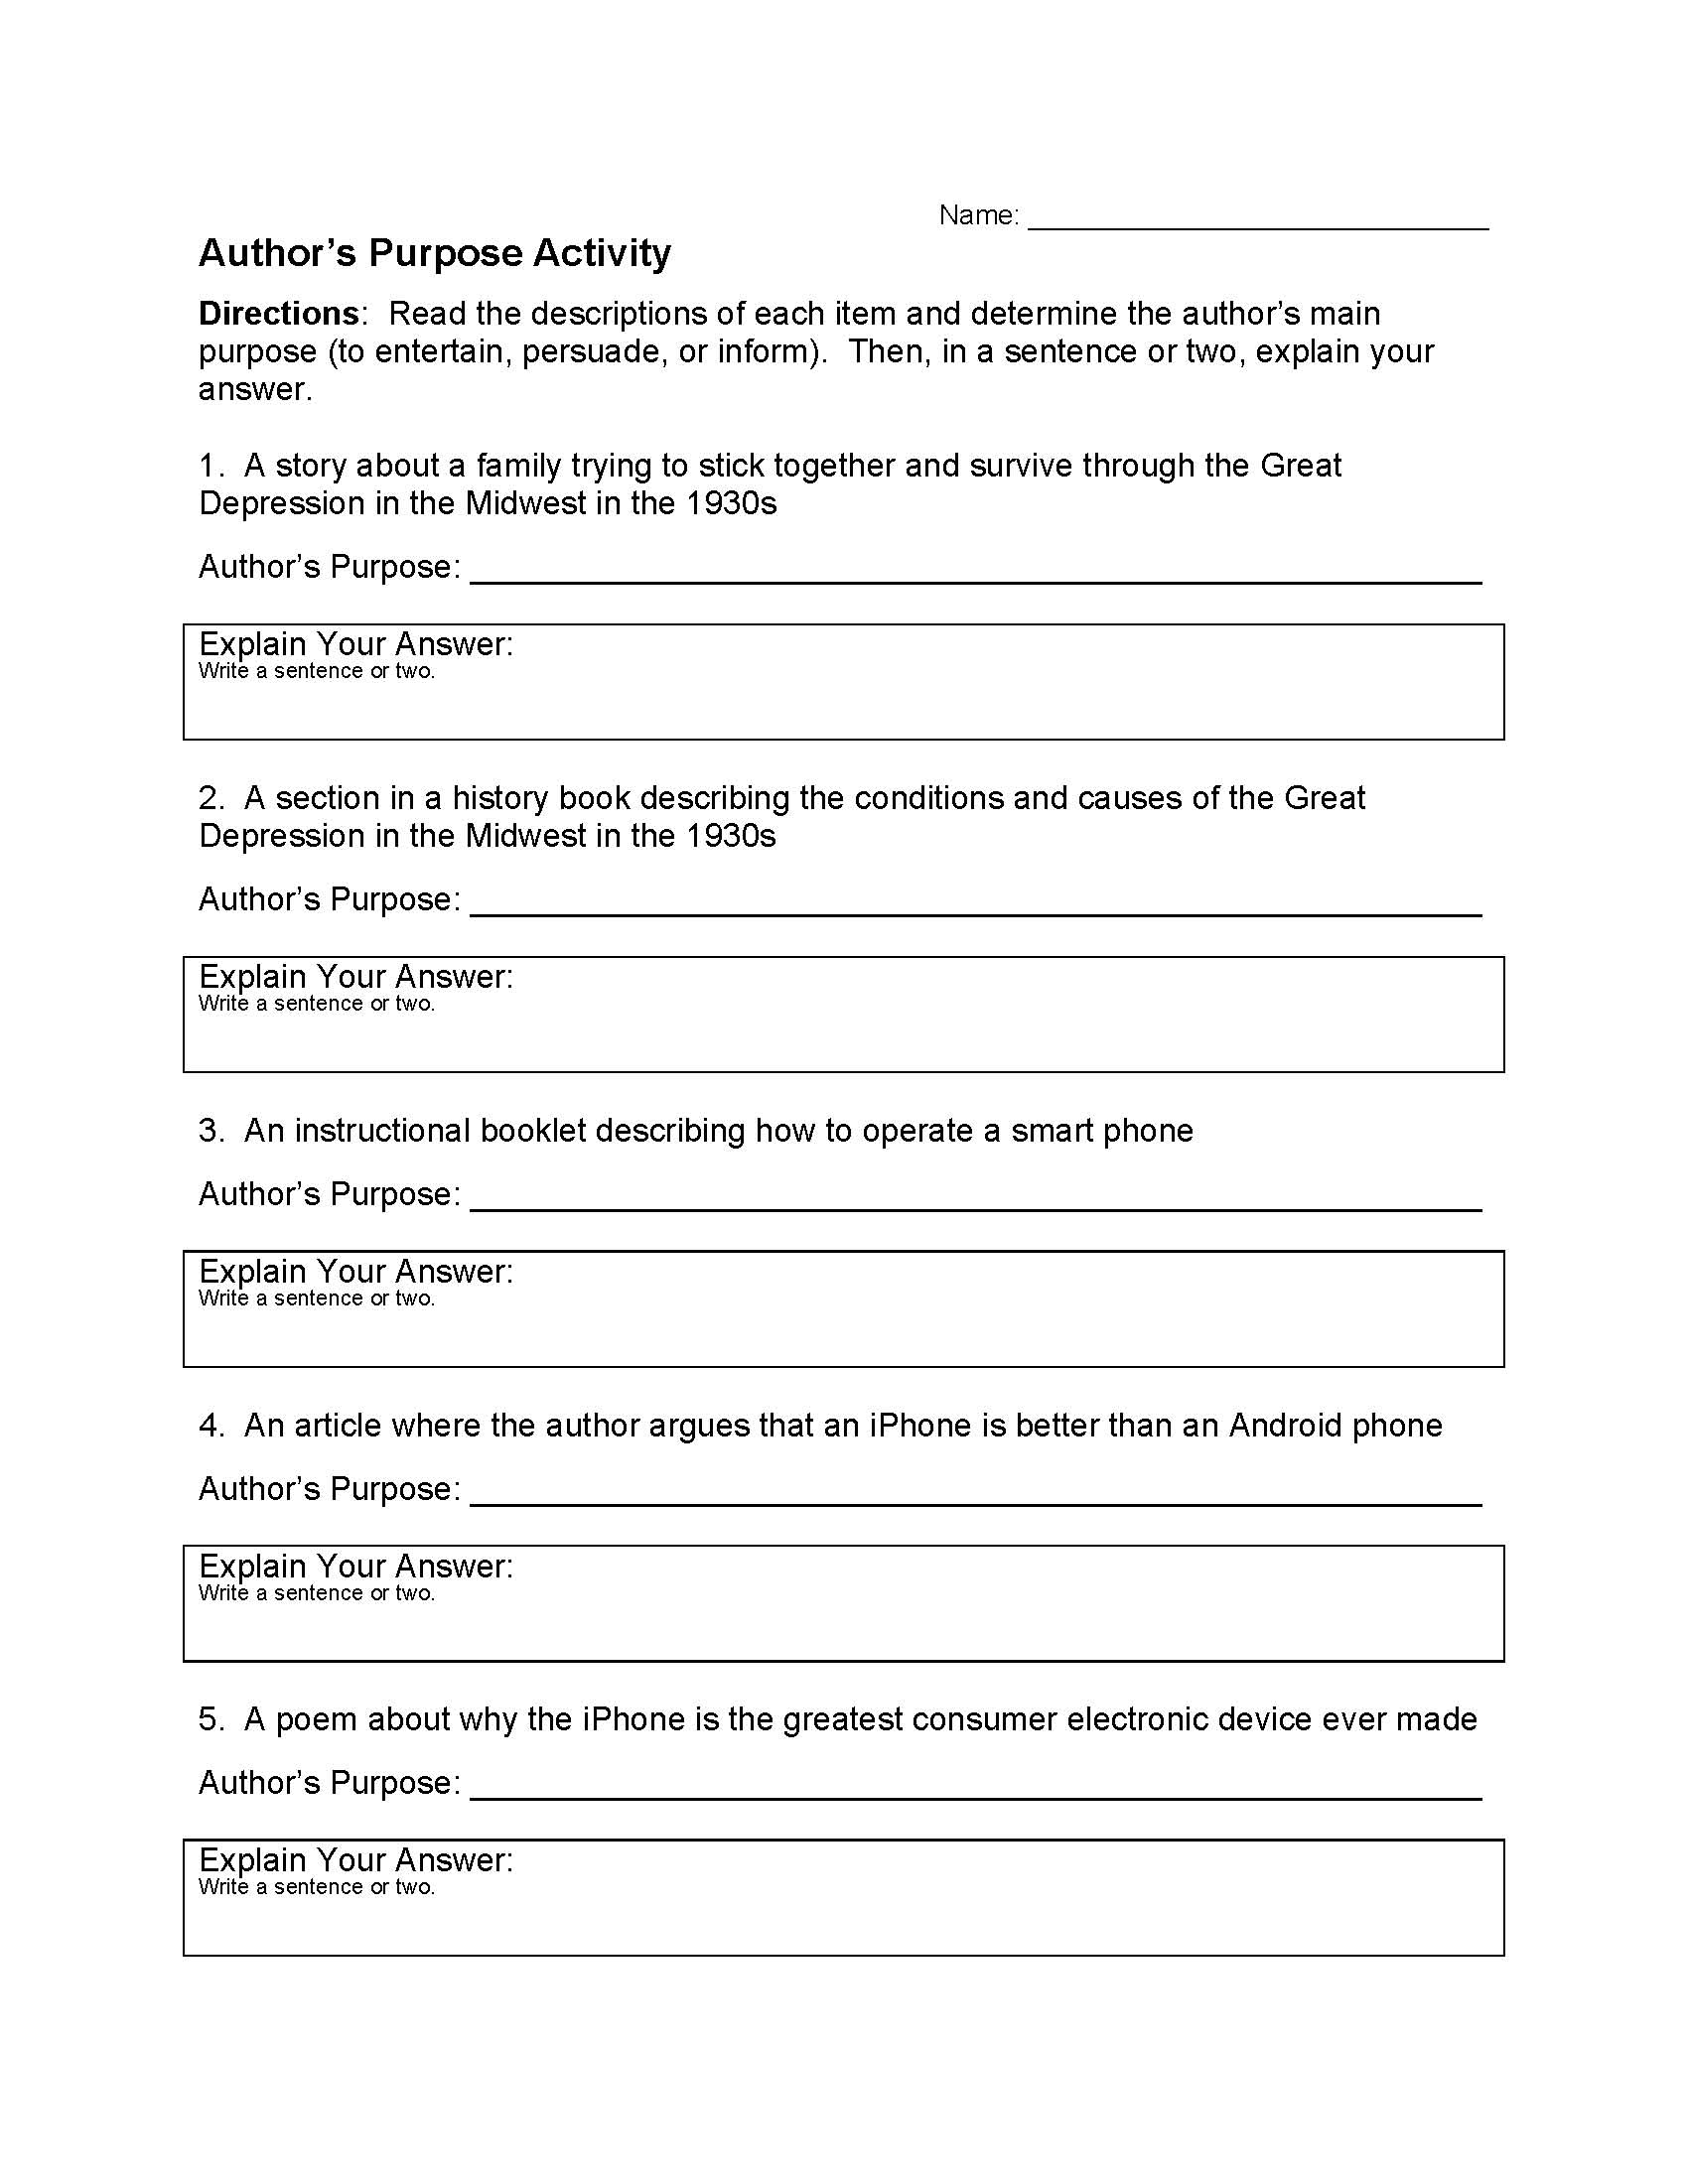 This is a preview image of Author's Purpose Worksheet 1. Click on it to enlarge it or view the source file.